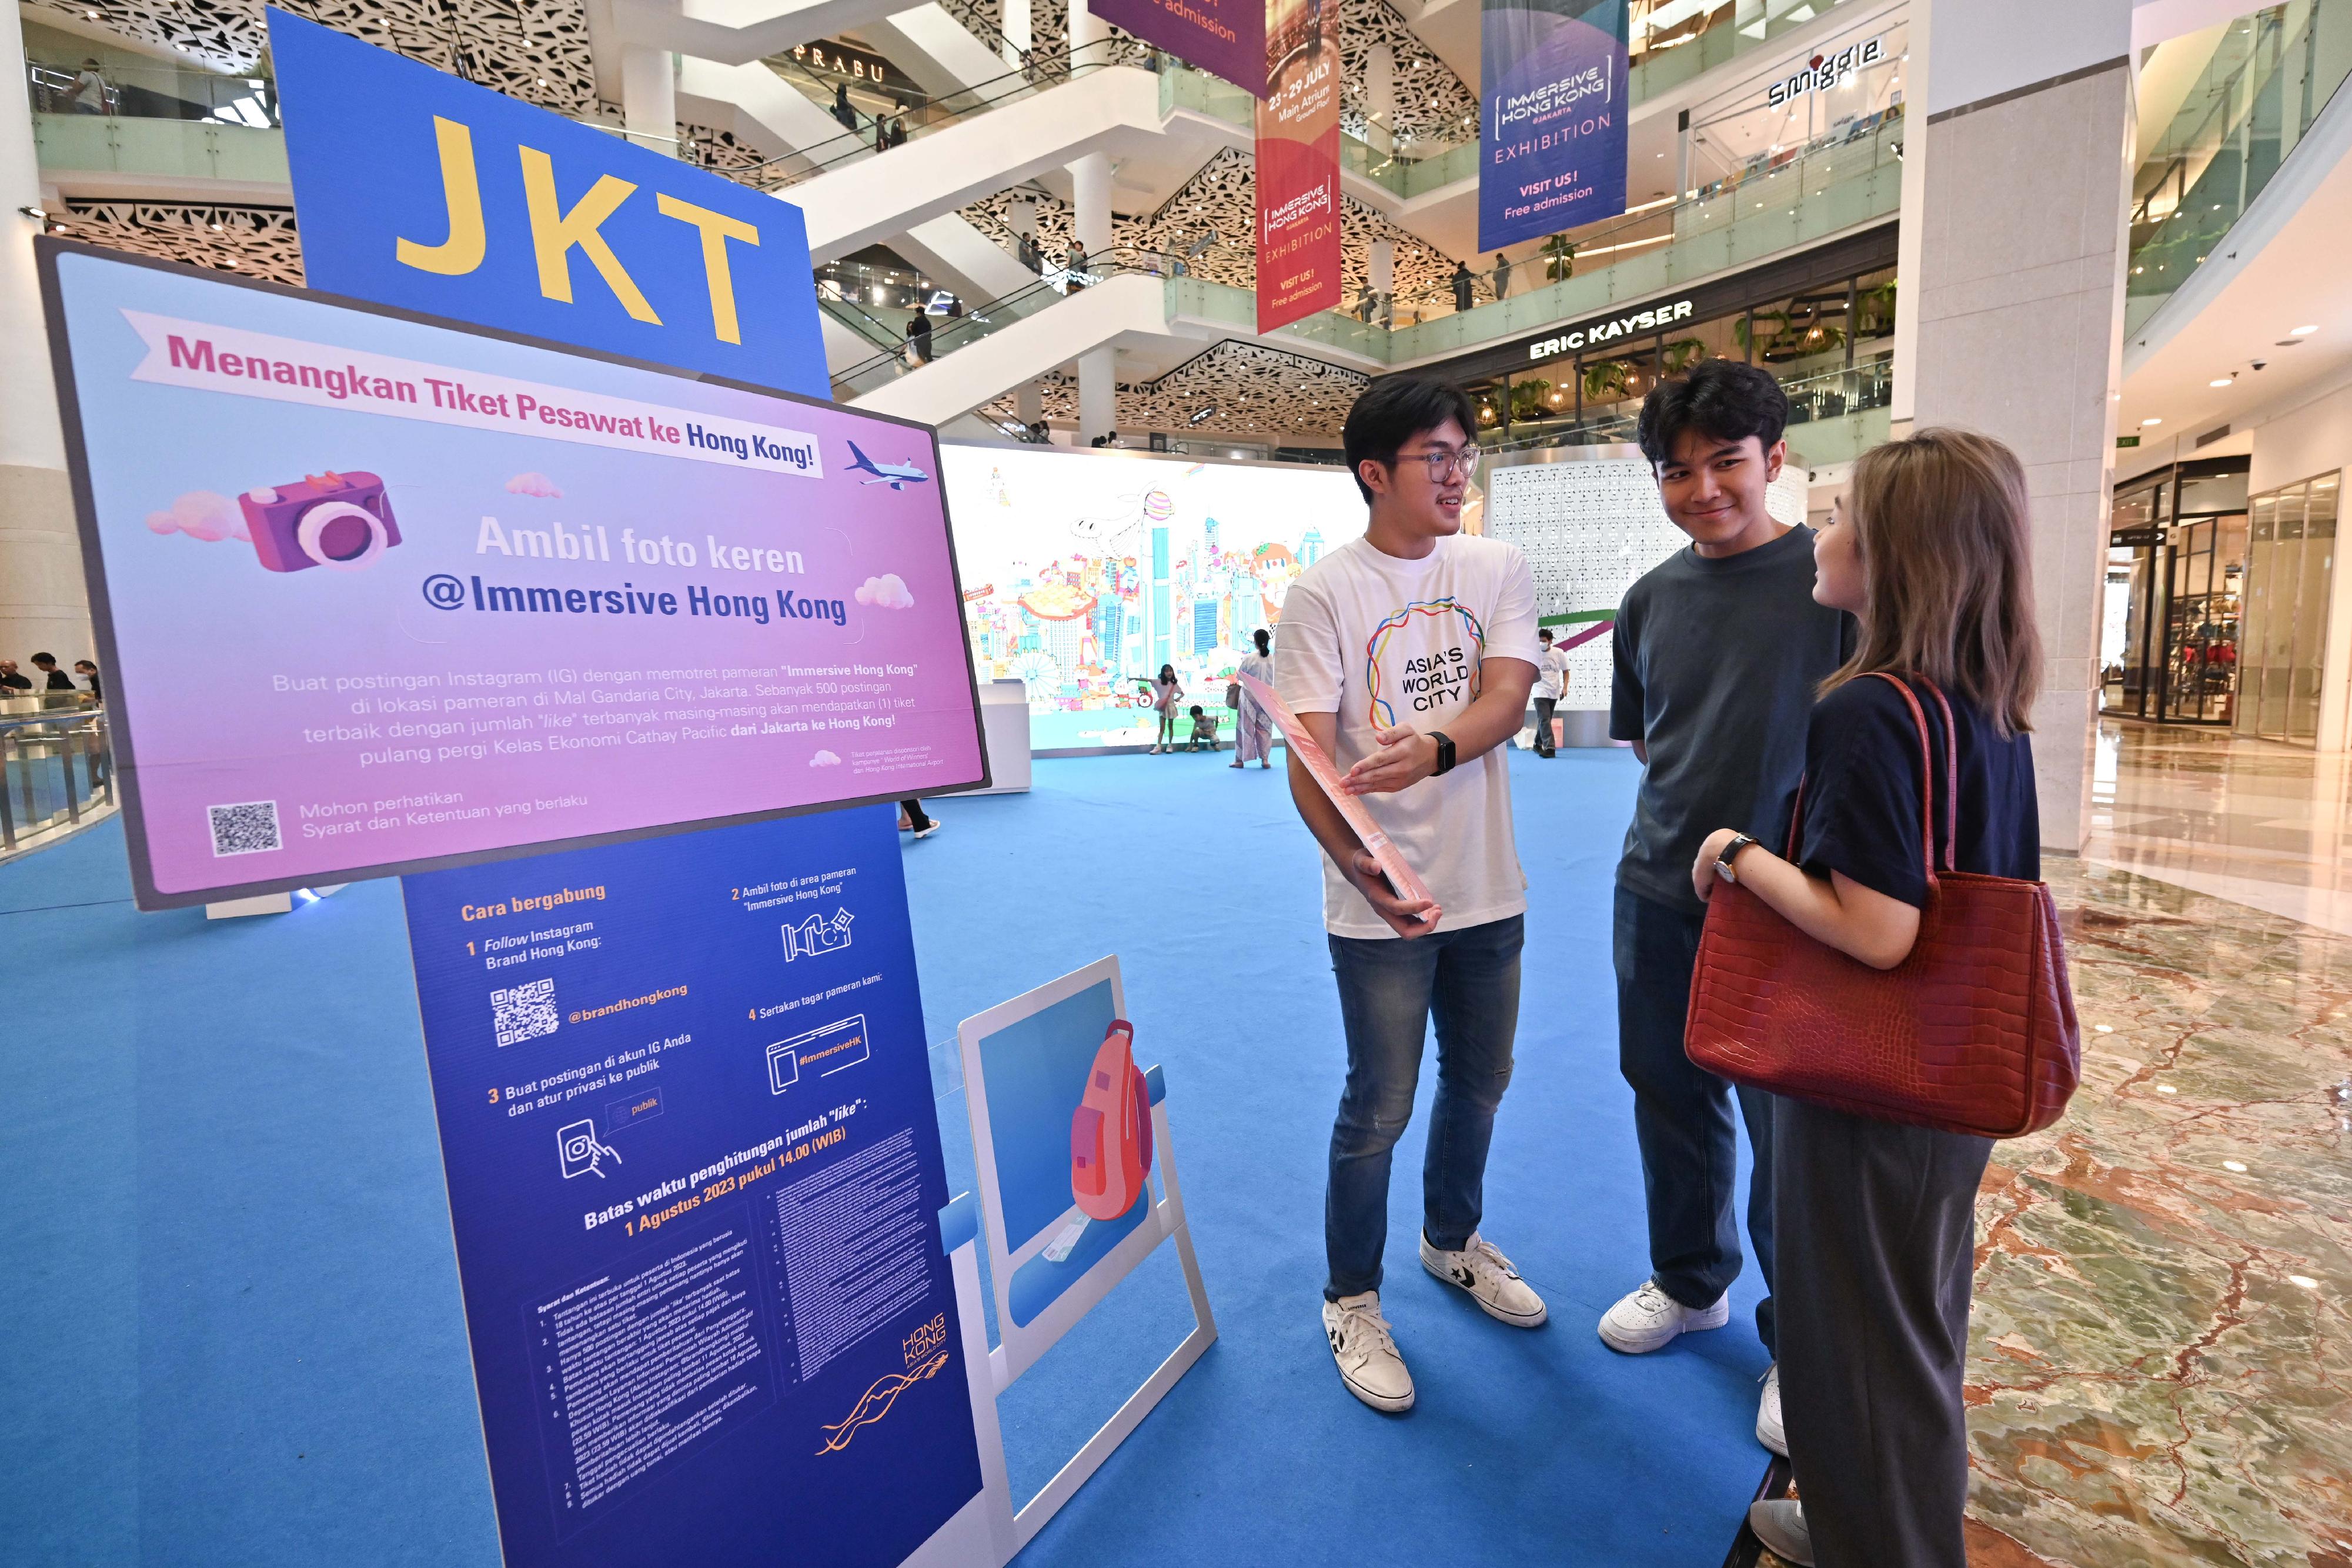 The "Immersive Hong Kong" roving exhibition, which showcases Hong Kong's unique strengths, advantages and opportunities with art technology, was launched in Jakarta, Indonesia, today (July 23) as part of a promotional campaign in Association of Southeast Asian Nations. An interactive game, "Snap a cool shot @Immersive Hong Kong", is on-going at the exhibition with prize air tickets from Jakarta to Hong Kong sponsored by Hong Kong International Airport's "World of Winners" Tickets Giveaway Campaign. Photo shows visitors looking at information of the game.